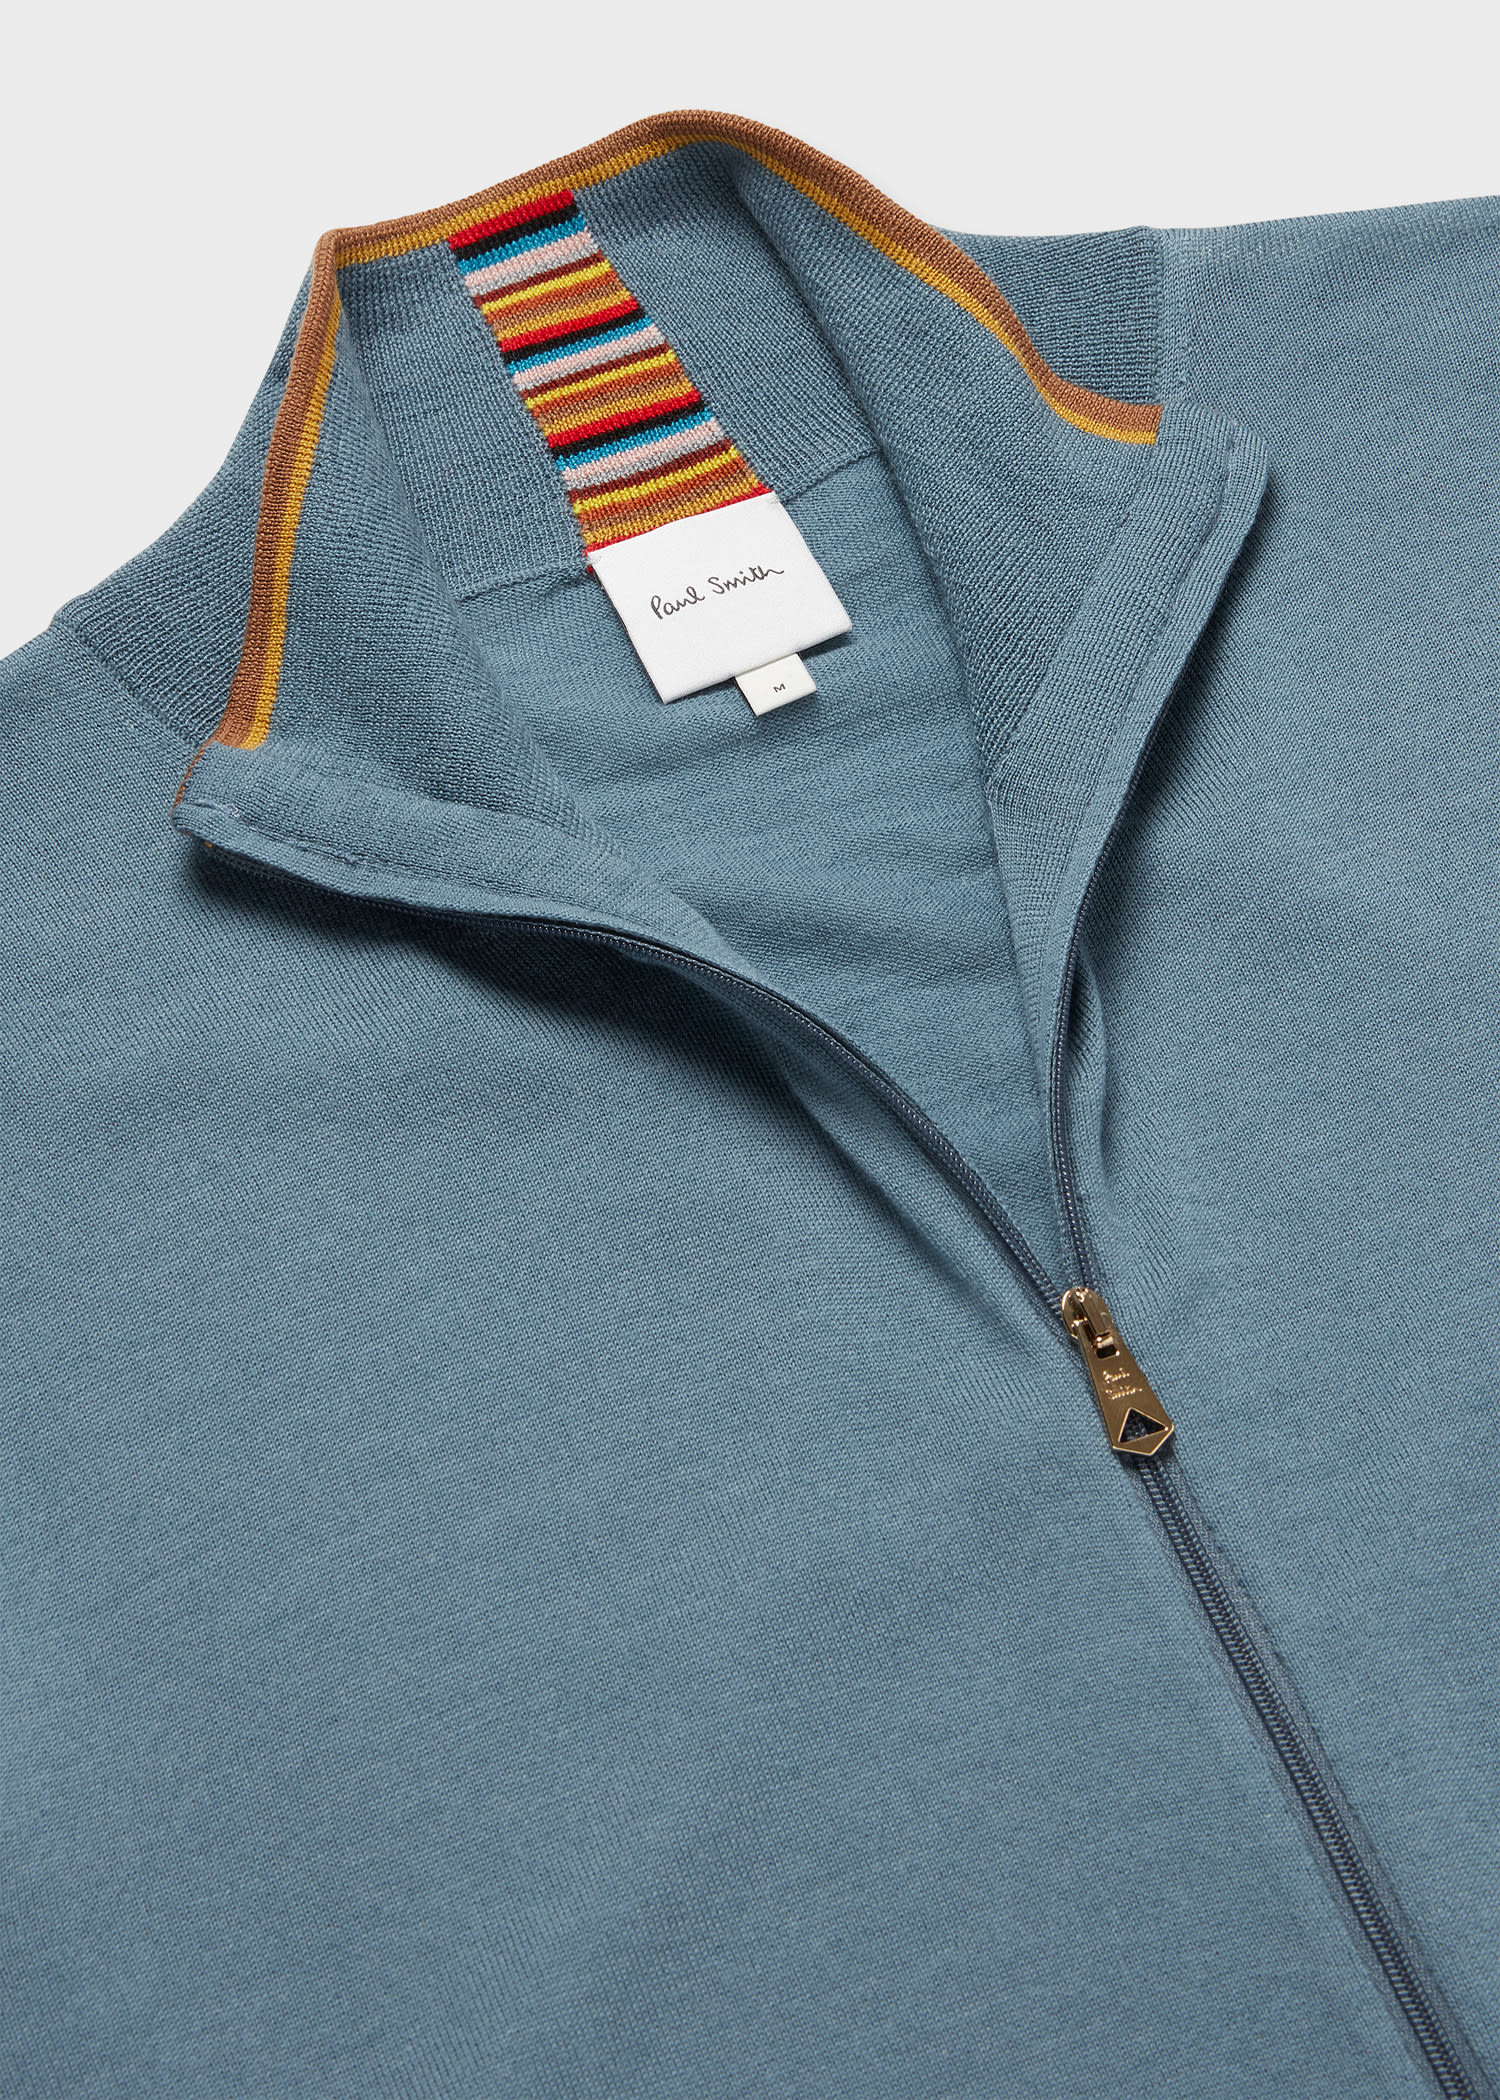 polo shirt with cardigan